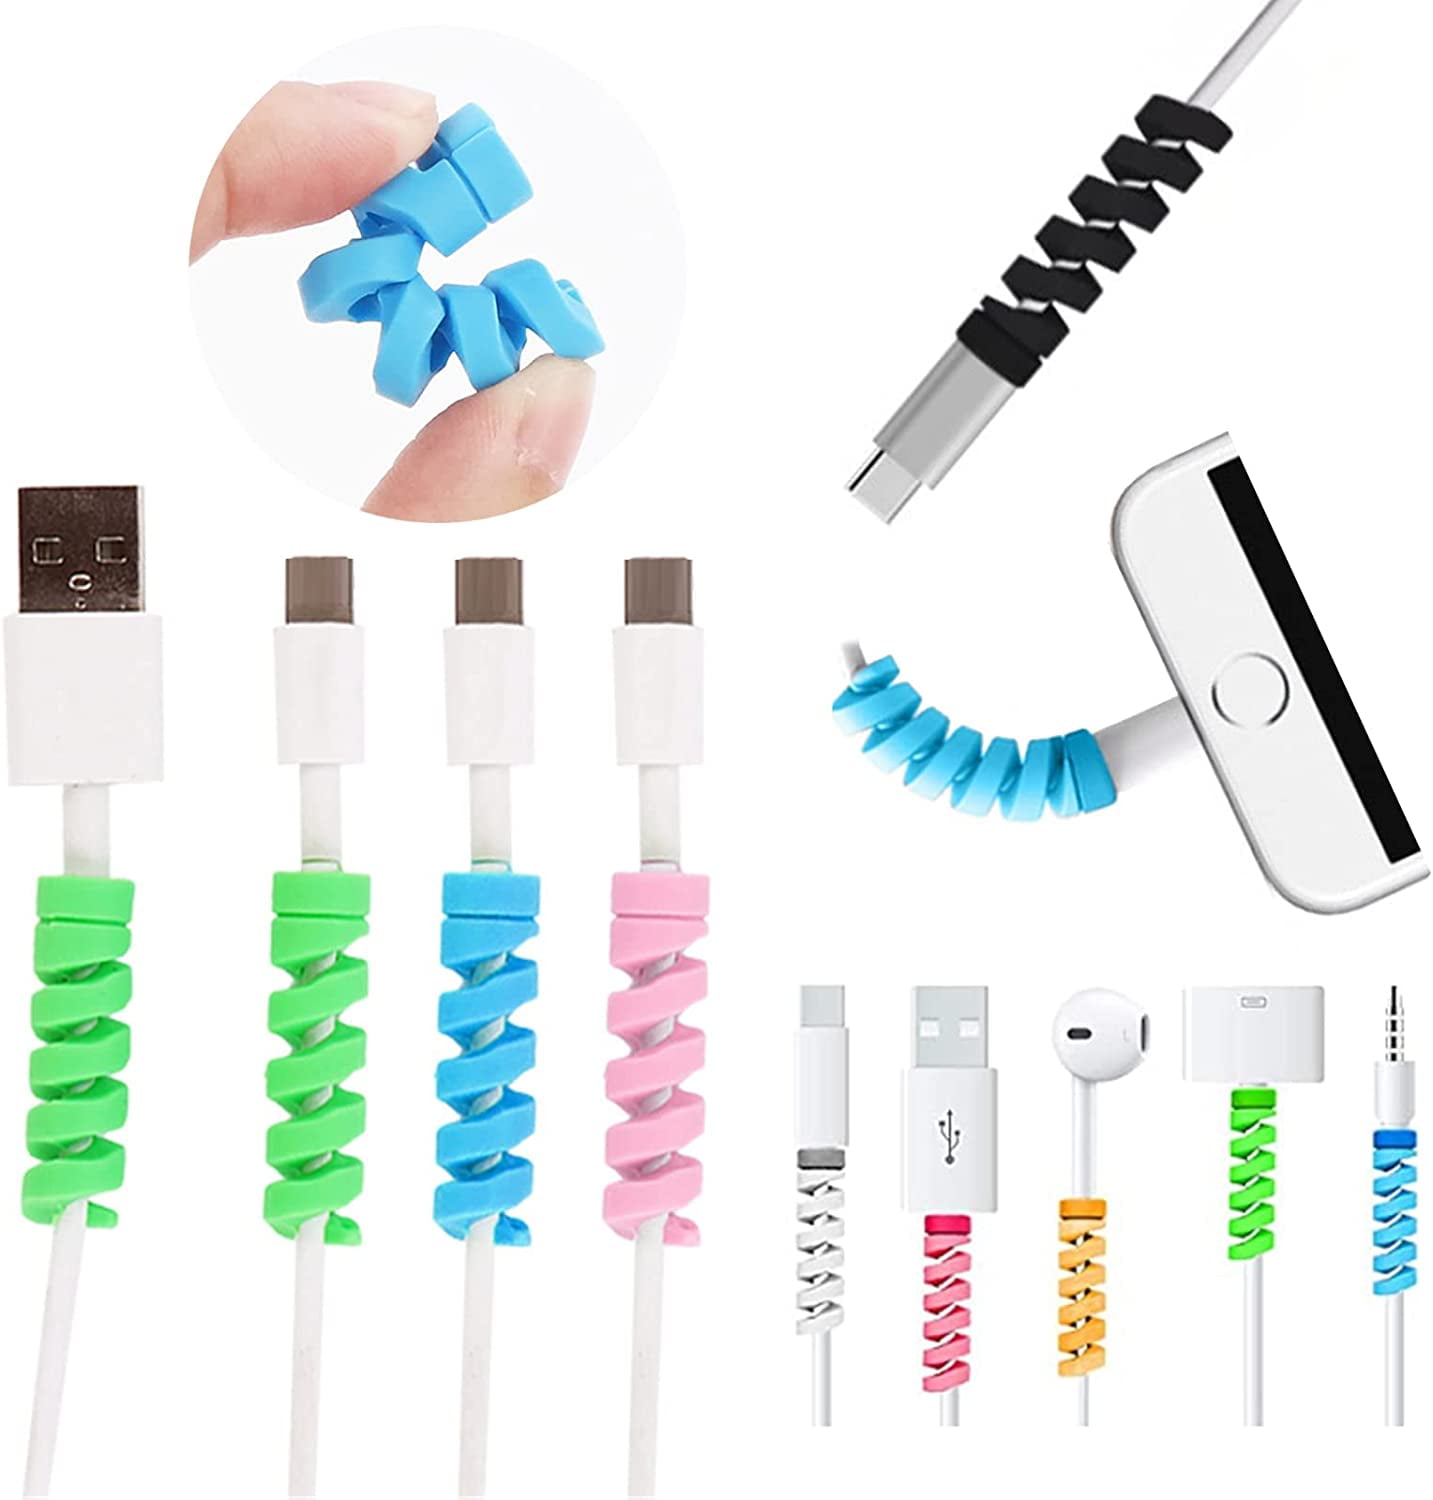 6029 Spiral Charger Spring Cable Protector Data Cable Saver at Rs 8.00   Data Cable Protector, Cable Protection Cover, Charger Wire Protector,  Rubber Protection Cable Cover, केबल प्रोटेक्टर - Deodap International  Private